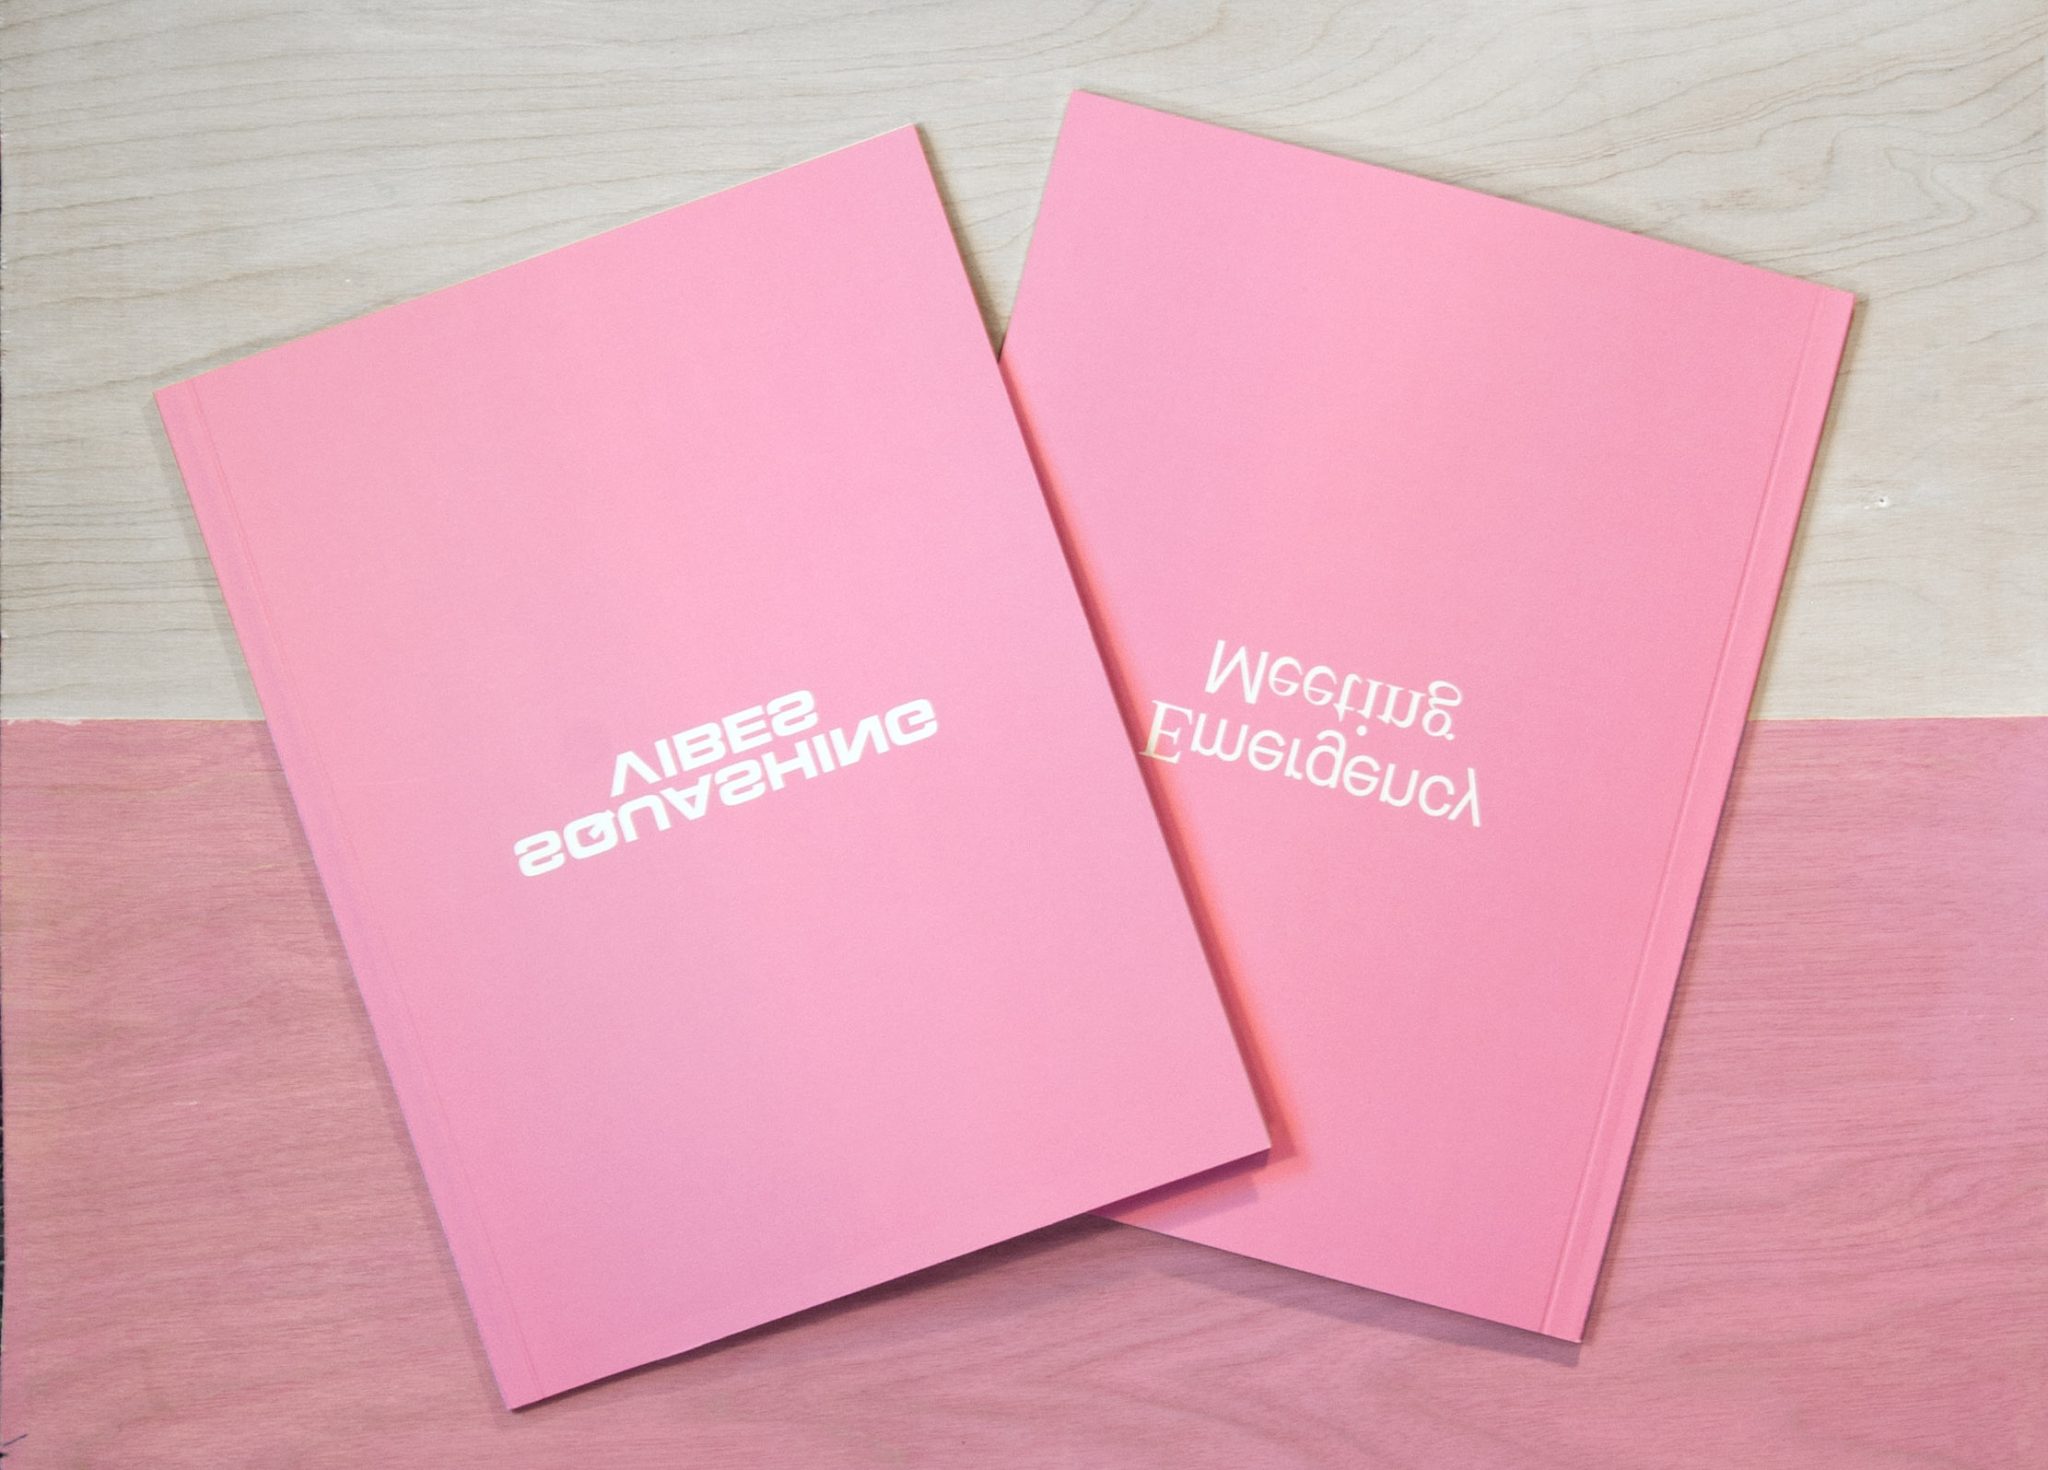 Front and back covers of the book